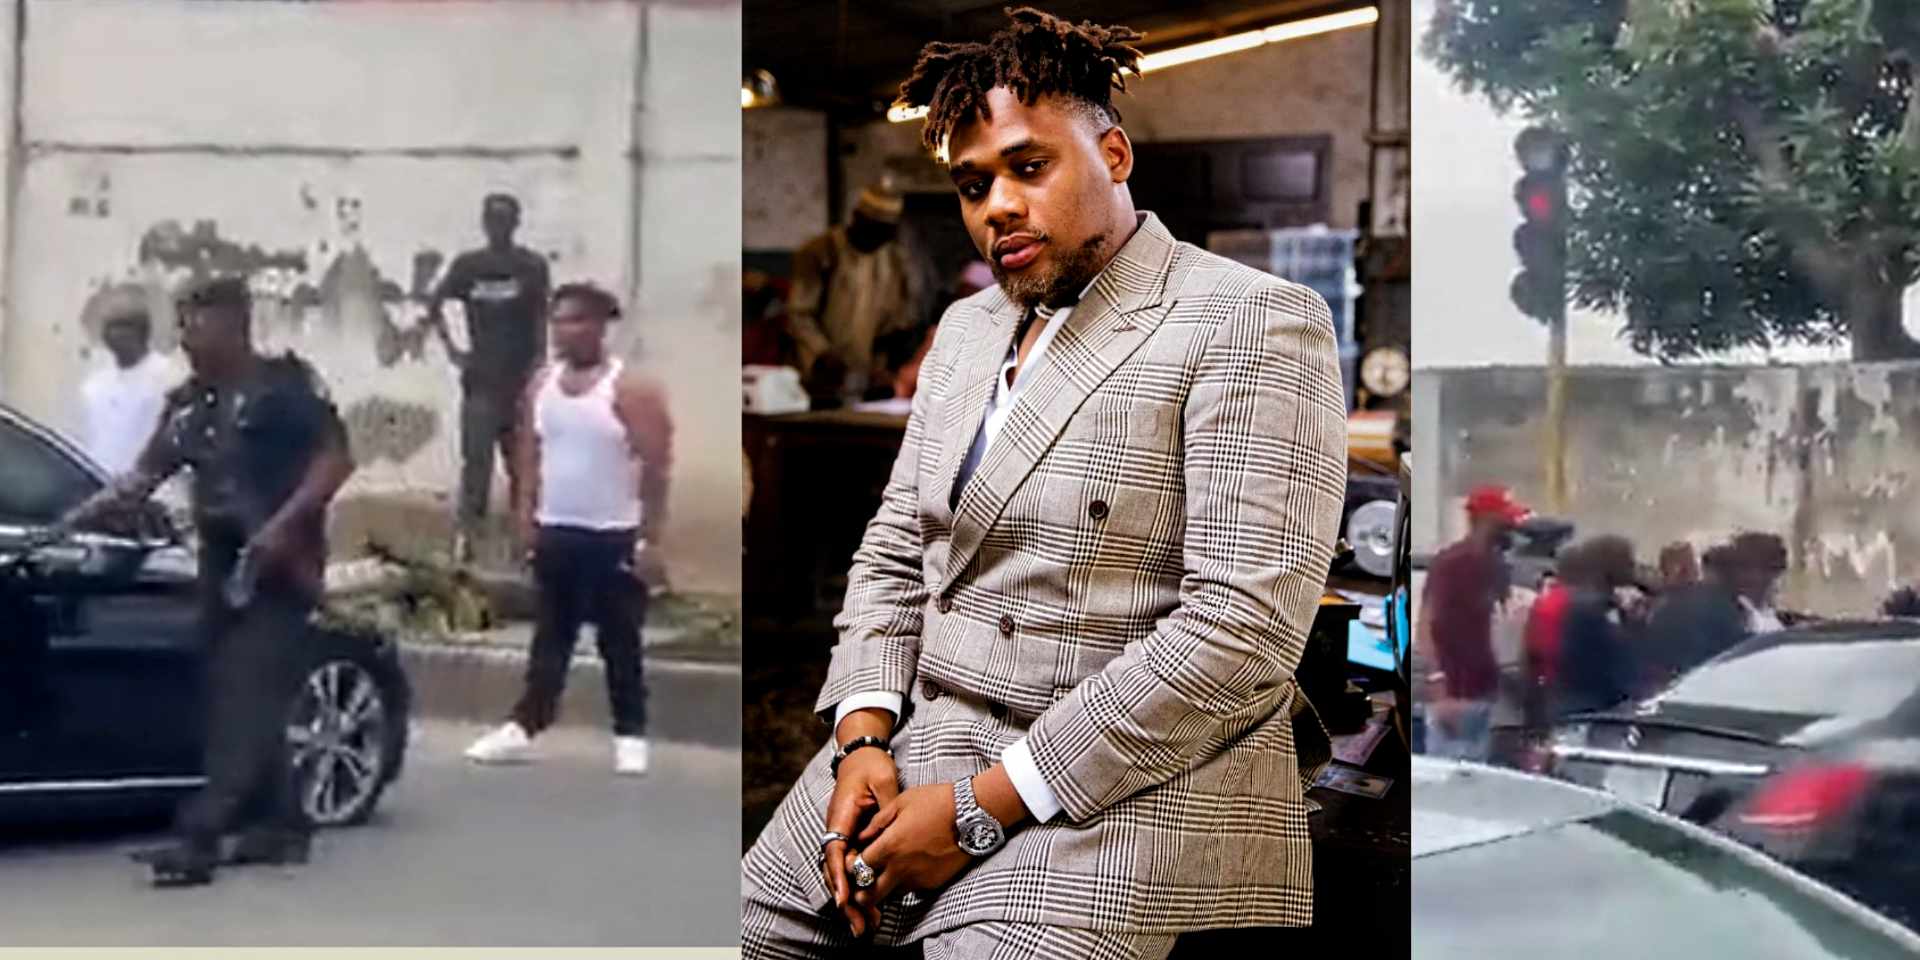 Reactions as police officers reportedly harass Boju BNXN; slap & tear off his shirt on the road [Video]